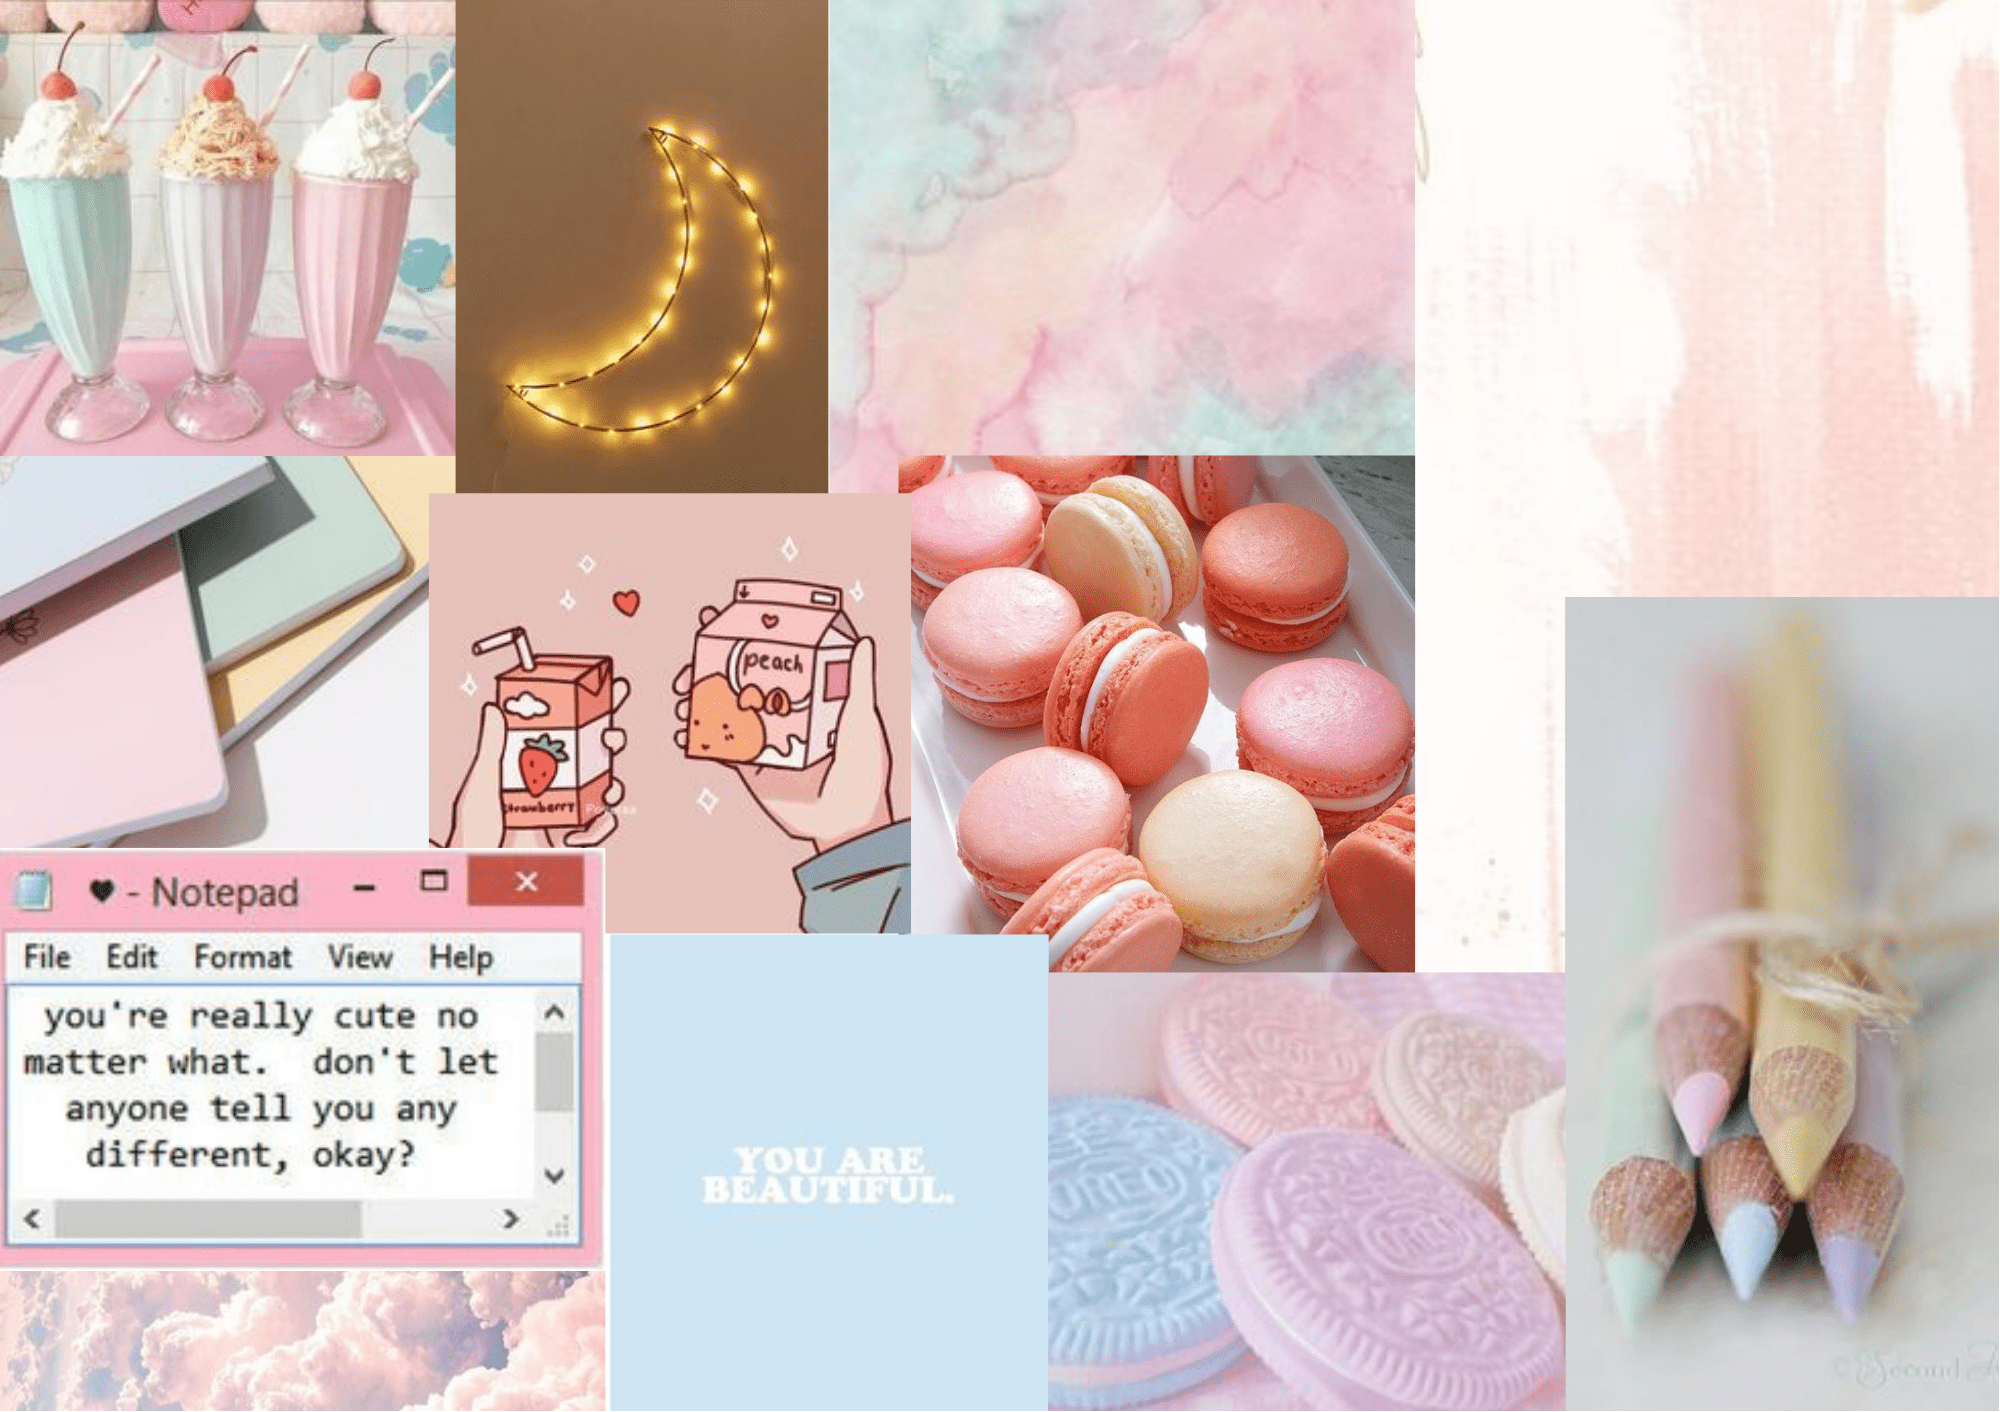 A collage of pastel pink and blue aesthetic images, including ice cream, macarons, and a notepad with the text 